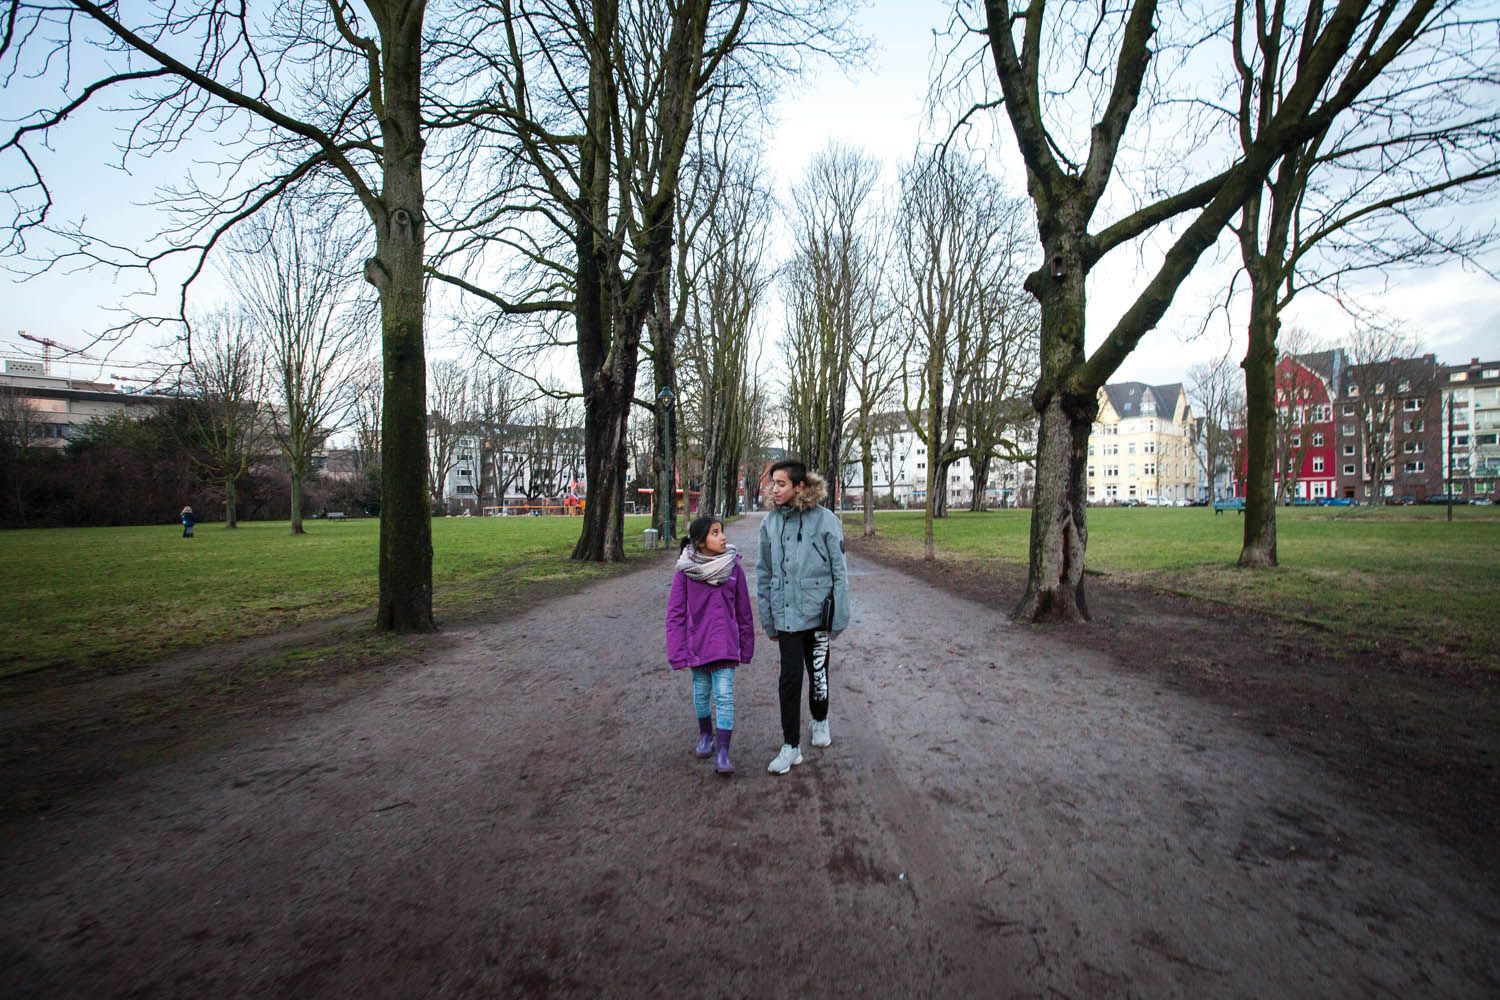 Milad (right) with his sister Mahya at the Frankenplatz park near their shelter in Düsseldorf. Image by Diana Markosian. Germany, 2017.